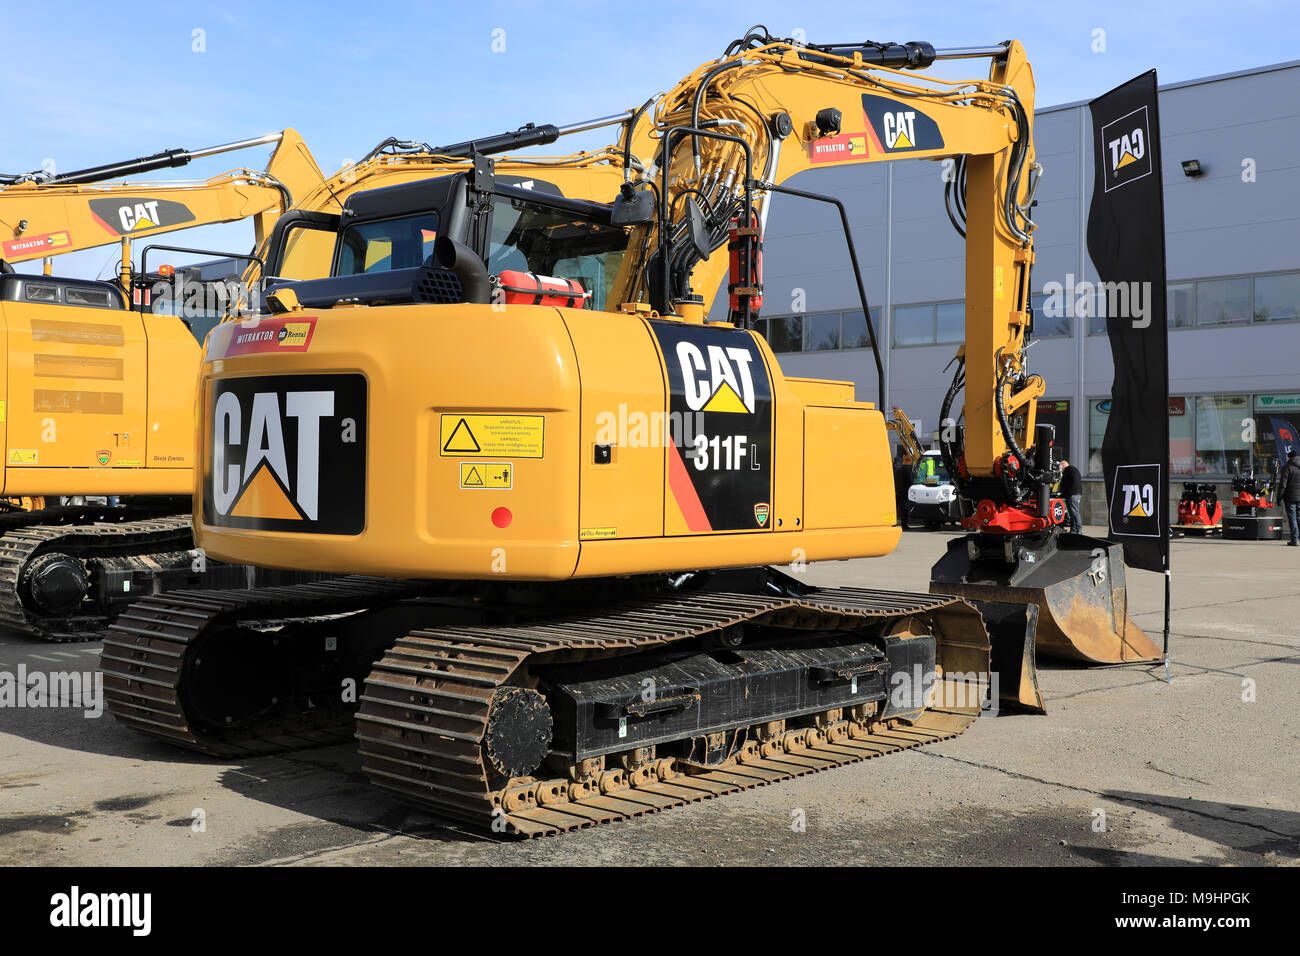 LIETO, FINLAND - MARCH 24, 2018: Cat 311FL Hydraulic excavator and other Cat construction equipment seen at the annual public event of Konekaupan Vill Stock Photo